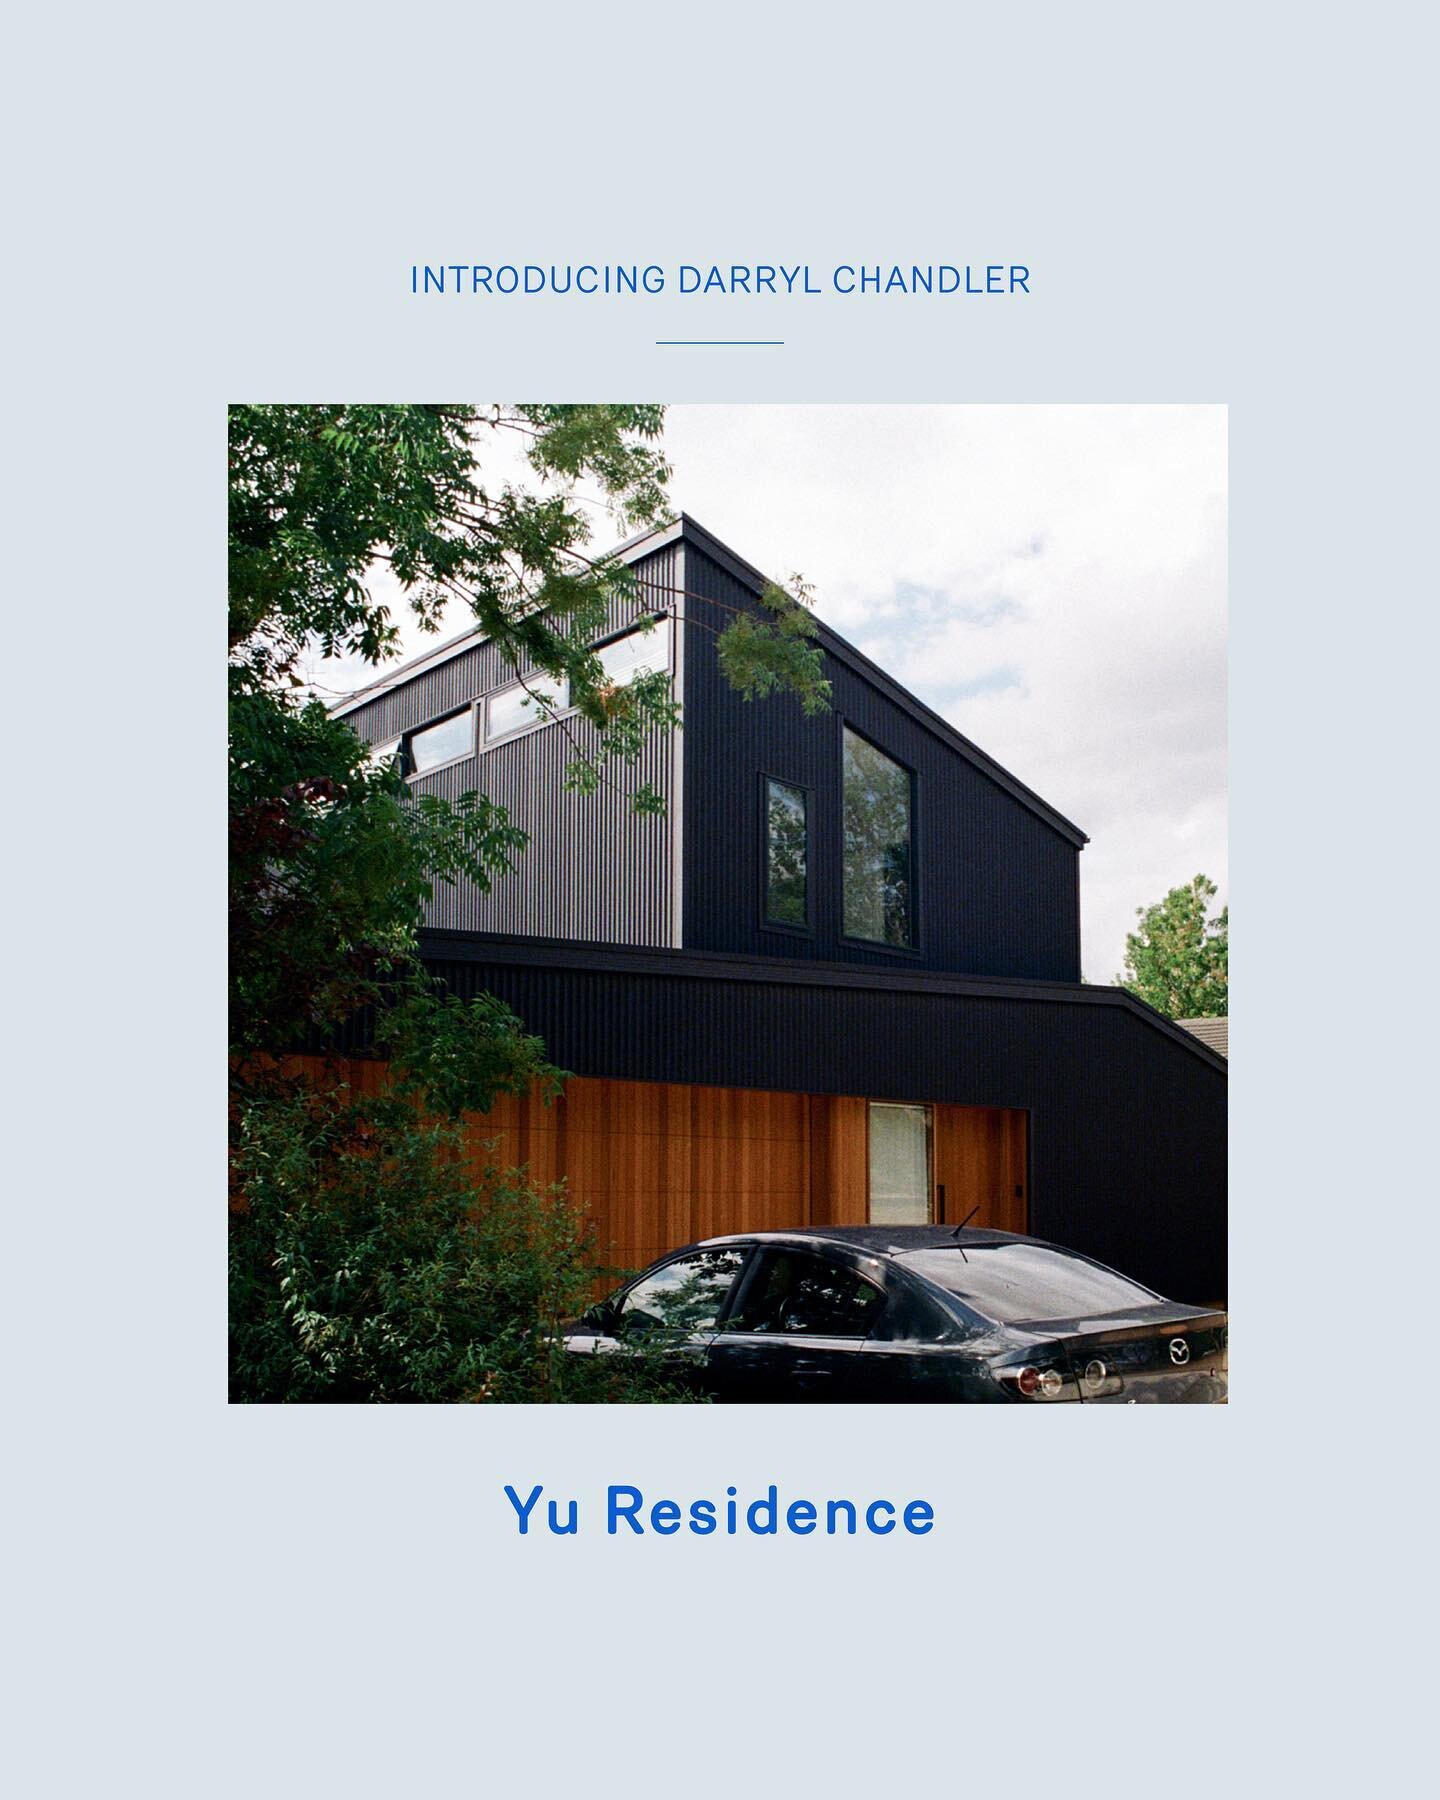 Introducing Darryl Chandler.
We asked Darryl to share a project he designed in Australia: This is Yu Residence.
 
Nestled into a leafy oak-lined street in Canberra, Yu Residence was designed for generational occupation. The ground floor is a comforta